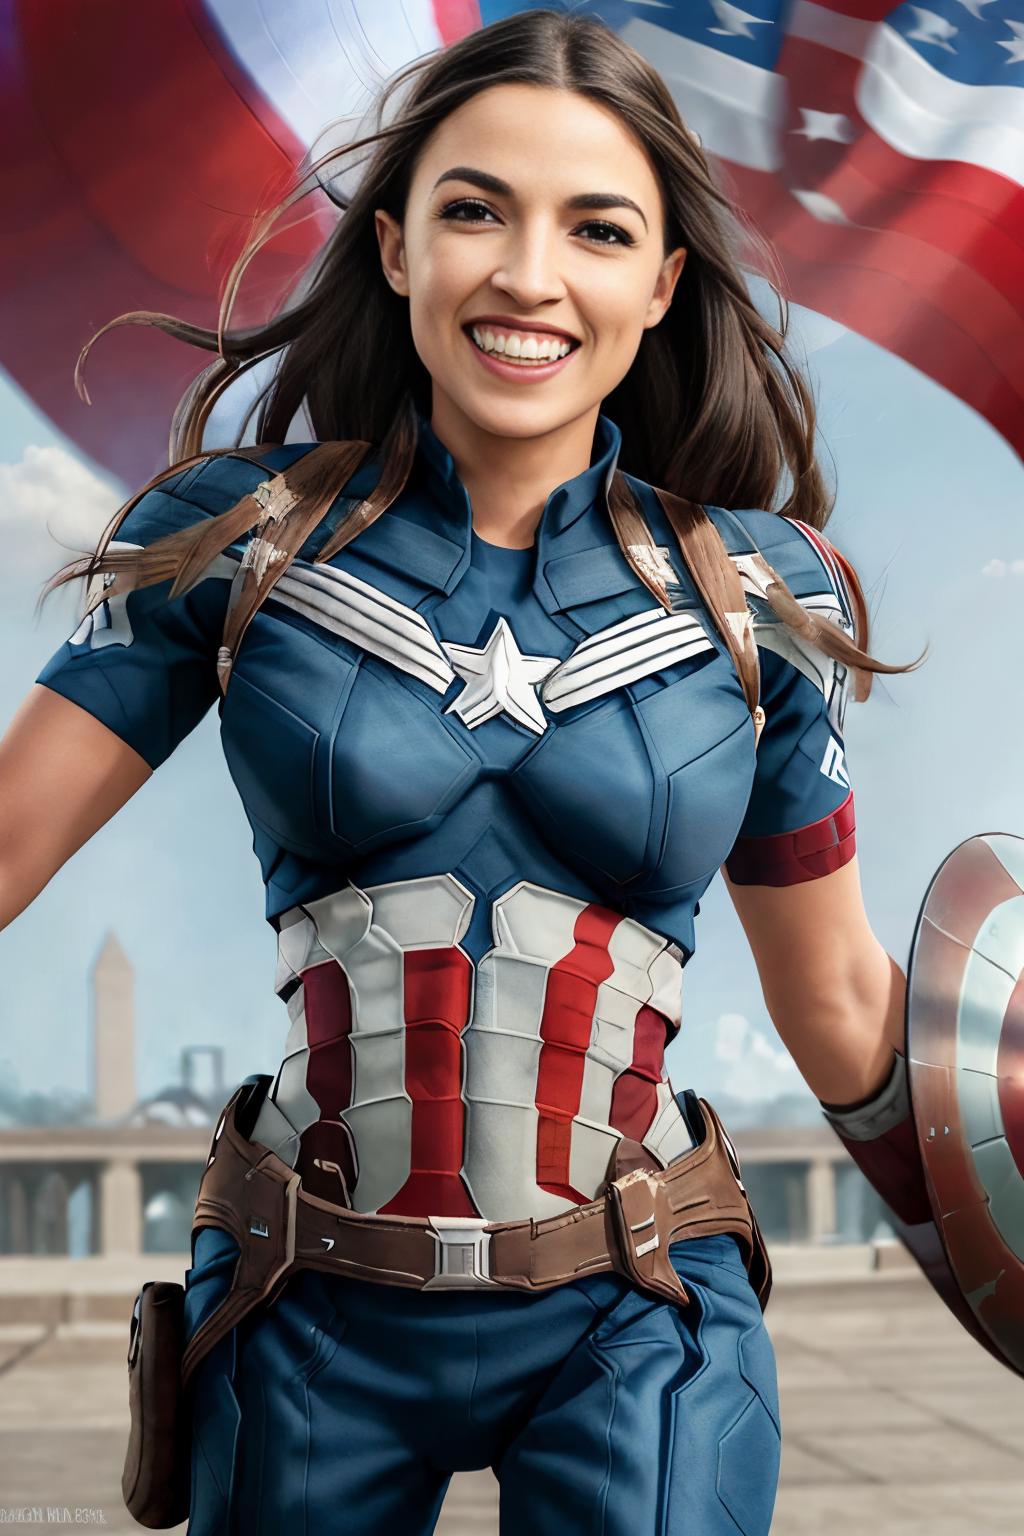 A female superhero in a blue and white costume, smiling and holding a shield, with the sky and a monument in the background.